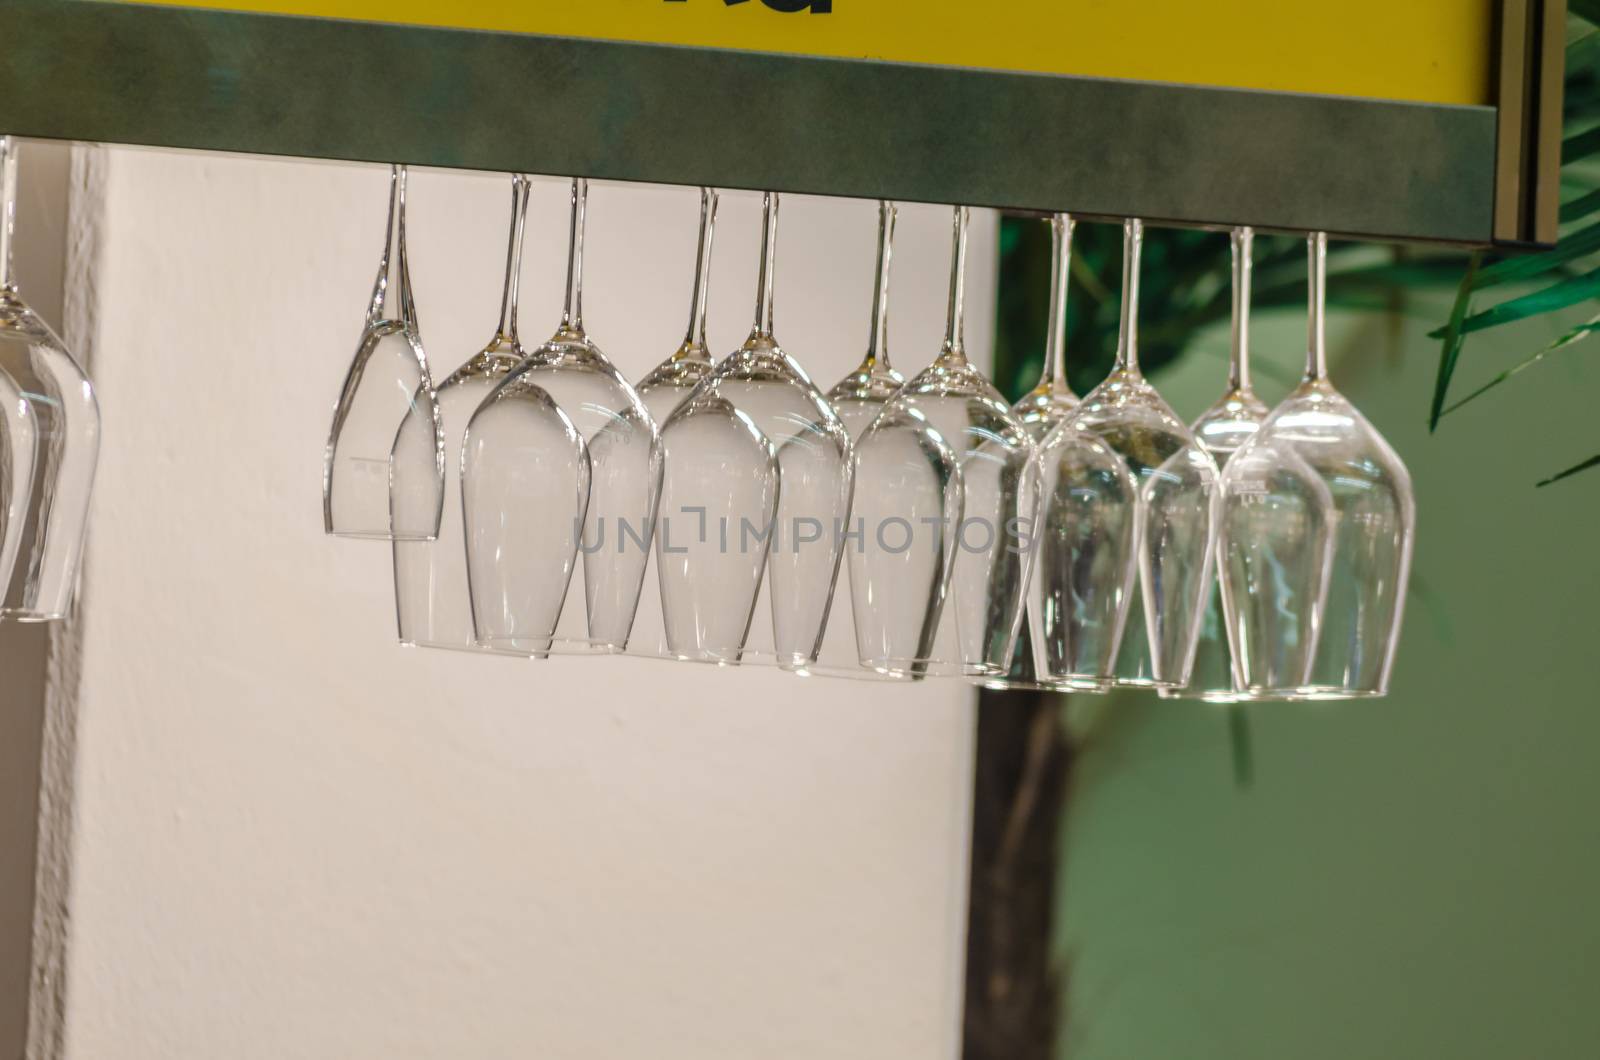 Glasses hanging in a bar by JFsPic